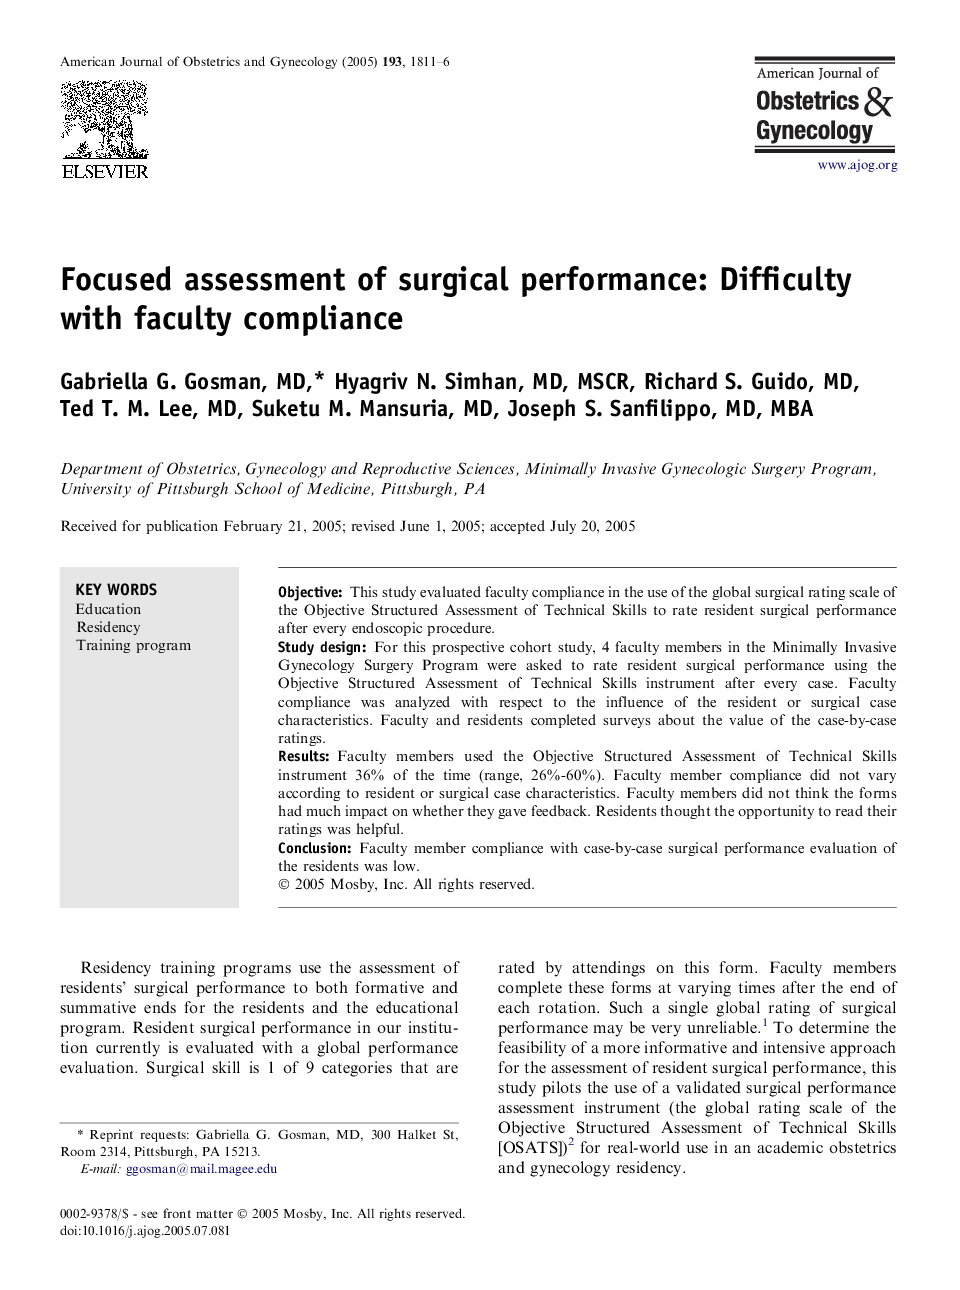 Focused assessment of surgical performance: Difficulty with faculty compliance